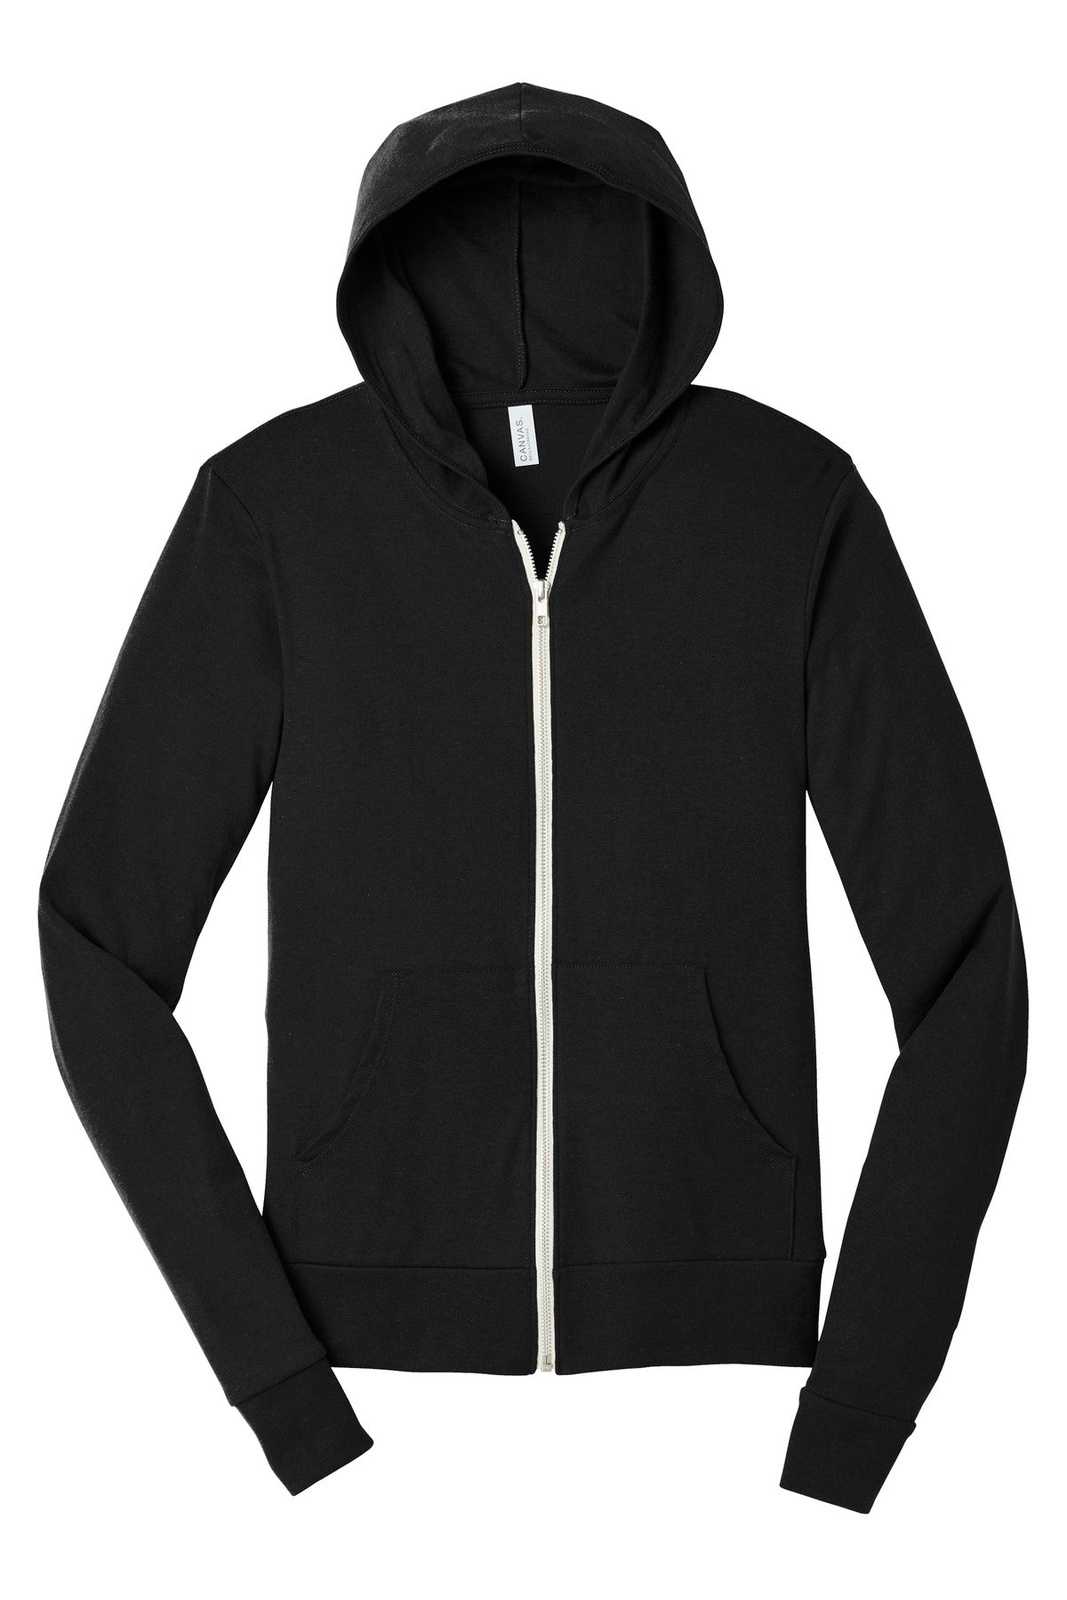 Bella + Canvas 3939 Unisex Triblend Full-Zip Lightweight Hoodie - Solid Black Triblend - HIT a Double